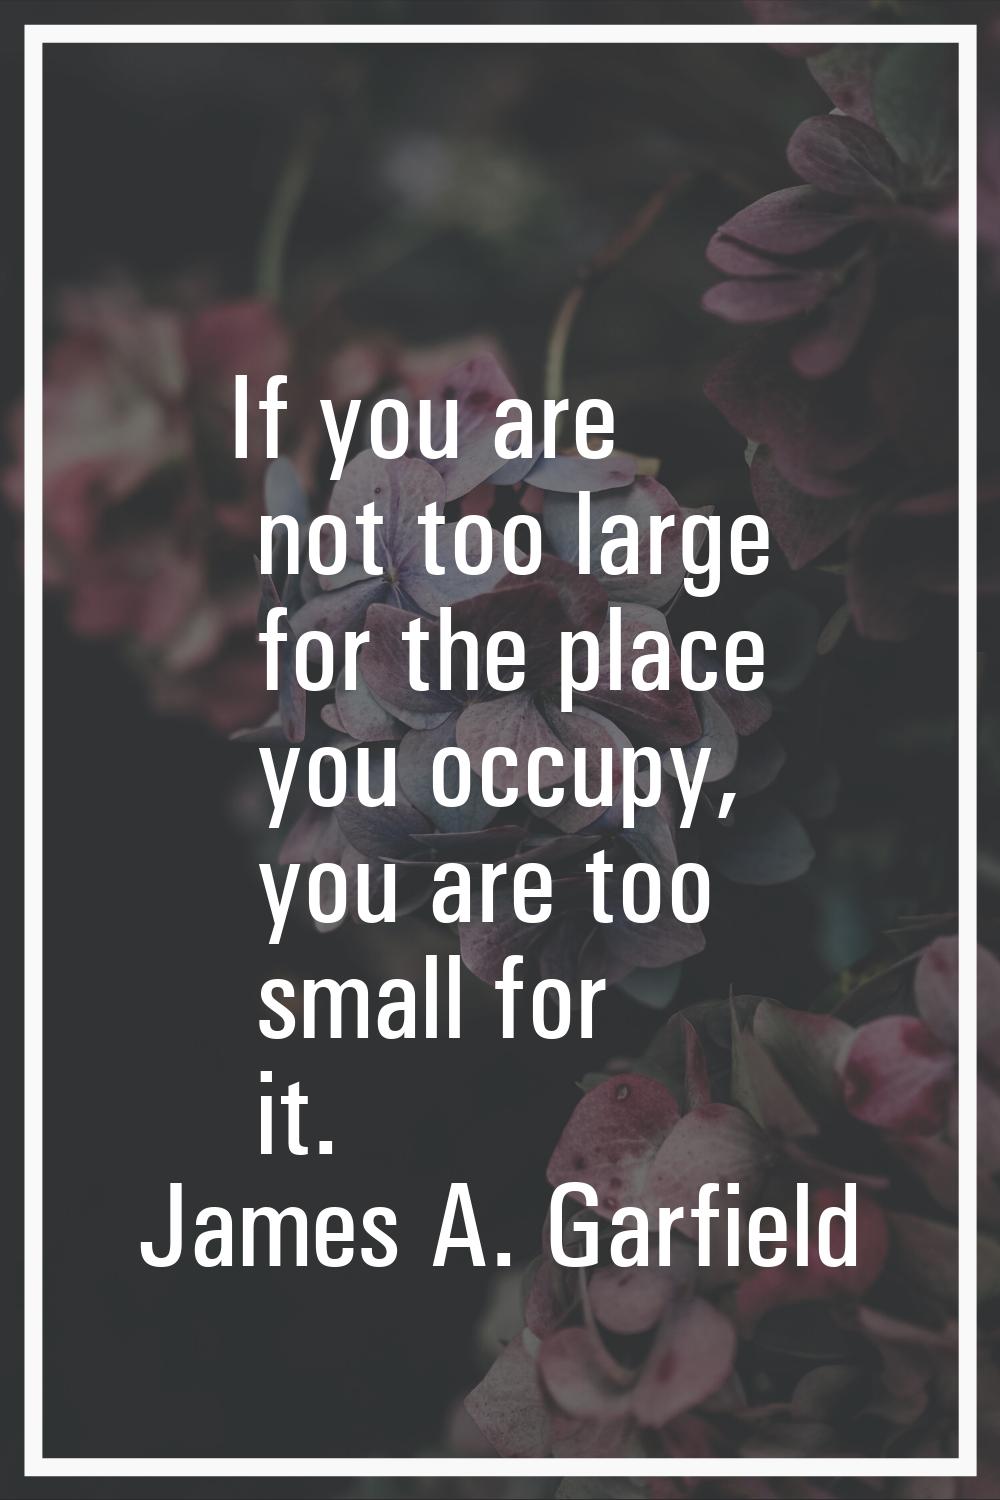 If you are not too large for the place you occupy, you are too small for it.